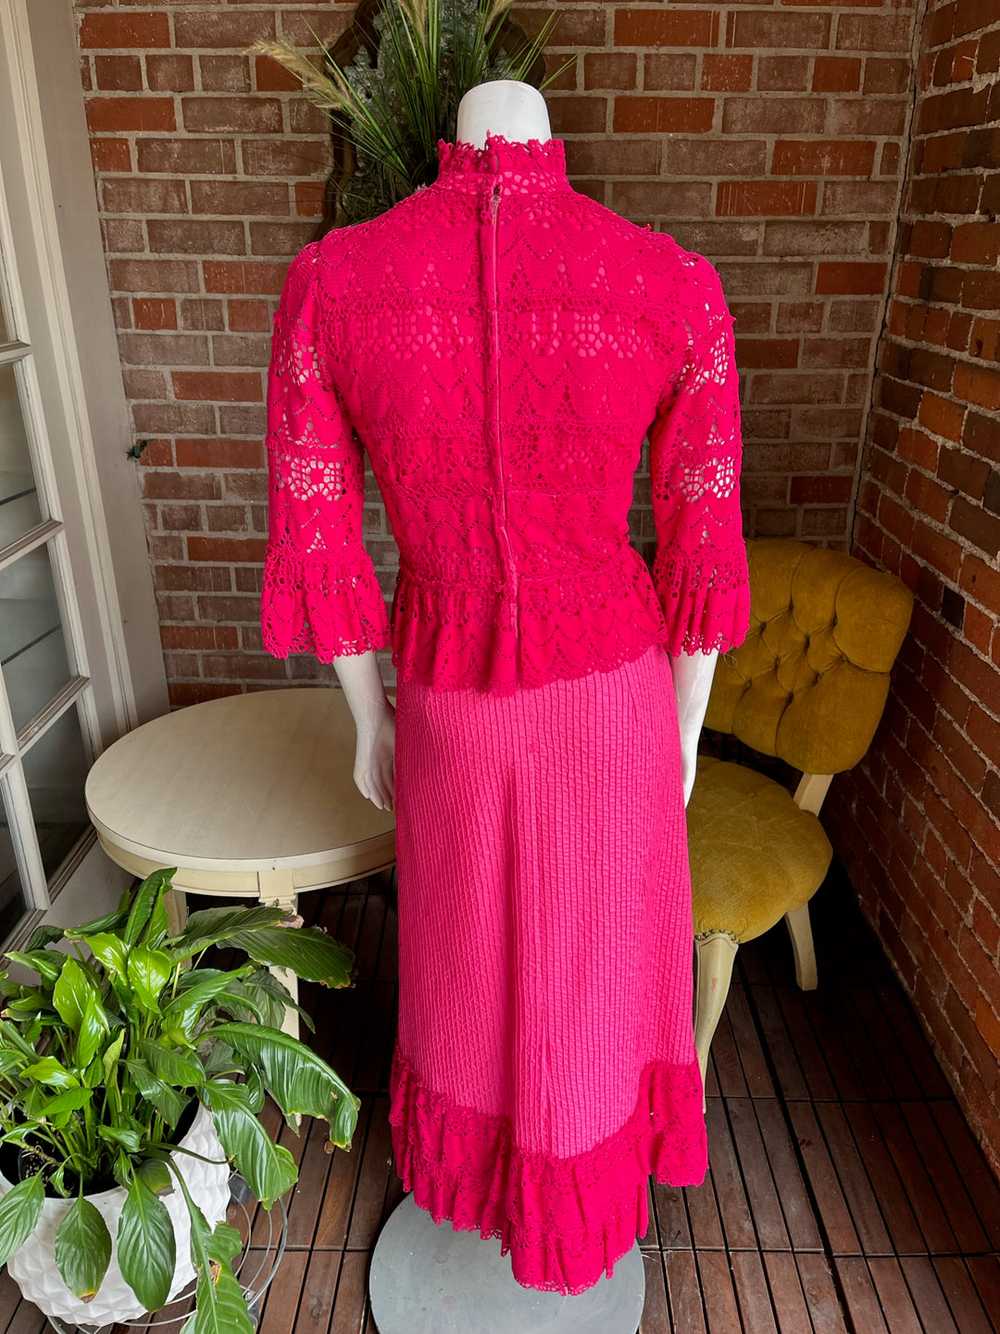 1960s Hot Pink Lace Mexican Dress - image 4